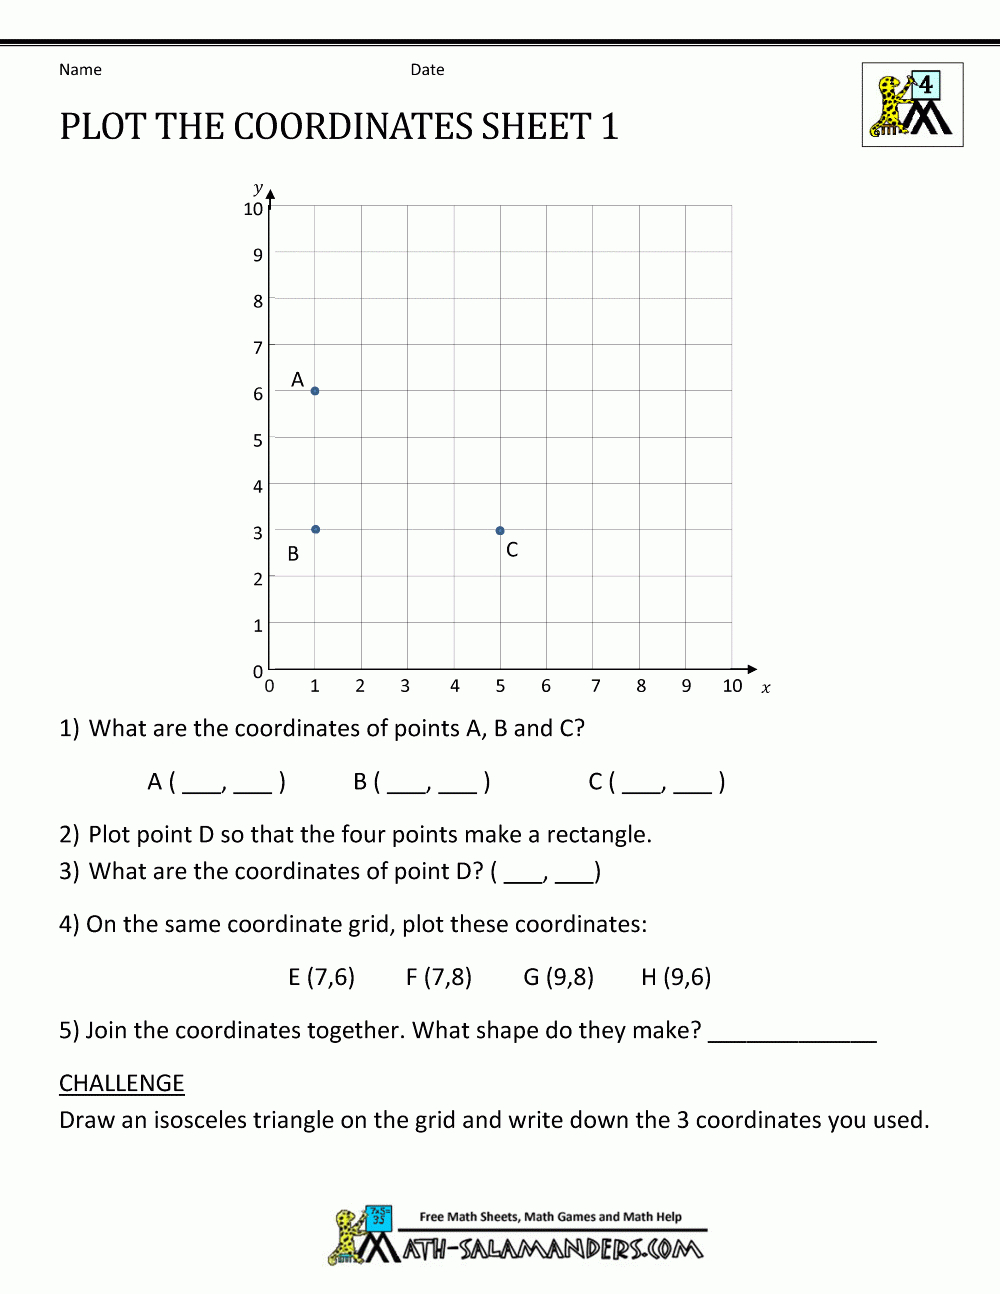 Coordinate Worksheets - Free Printable Coordinate Graphing Pictures Worksheets